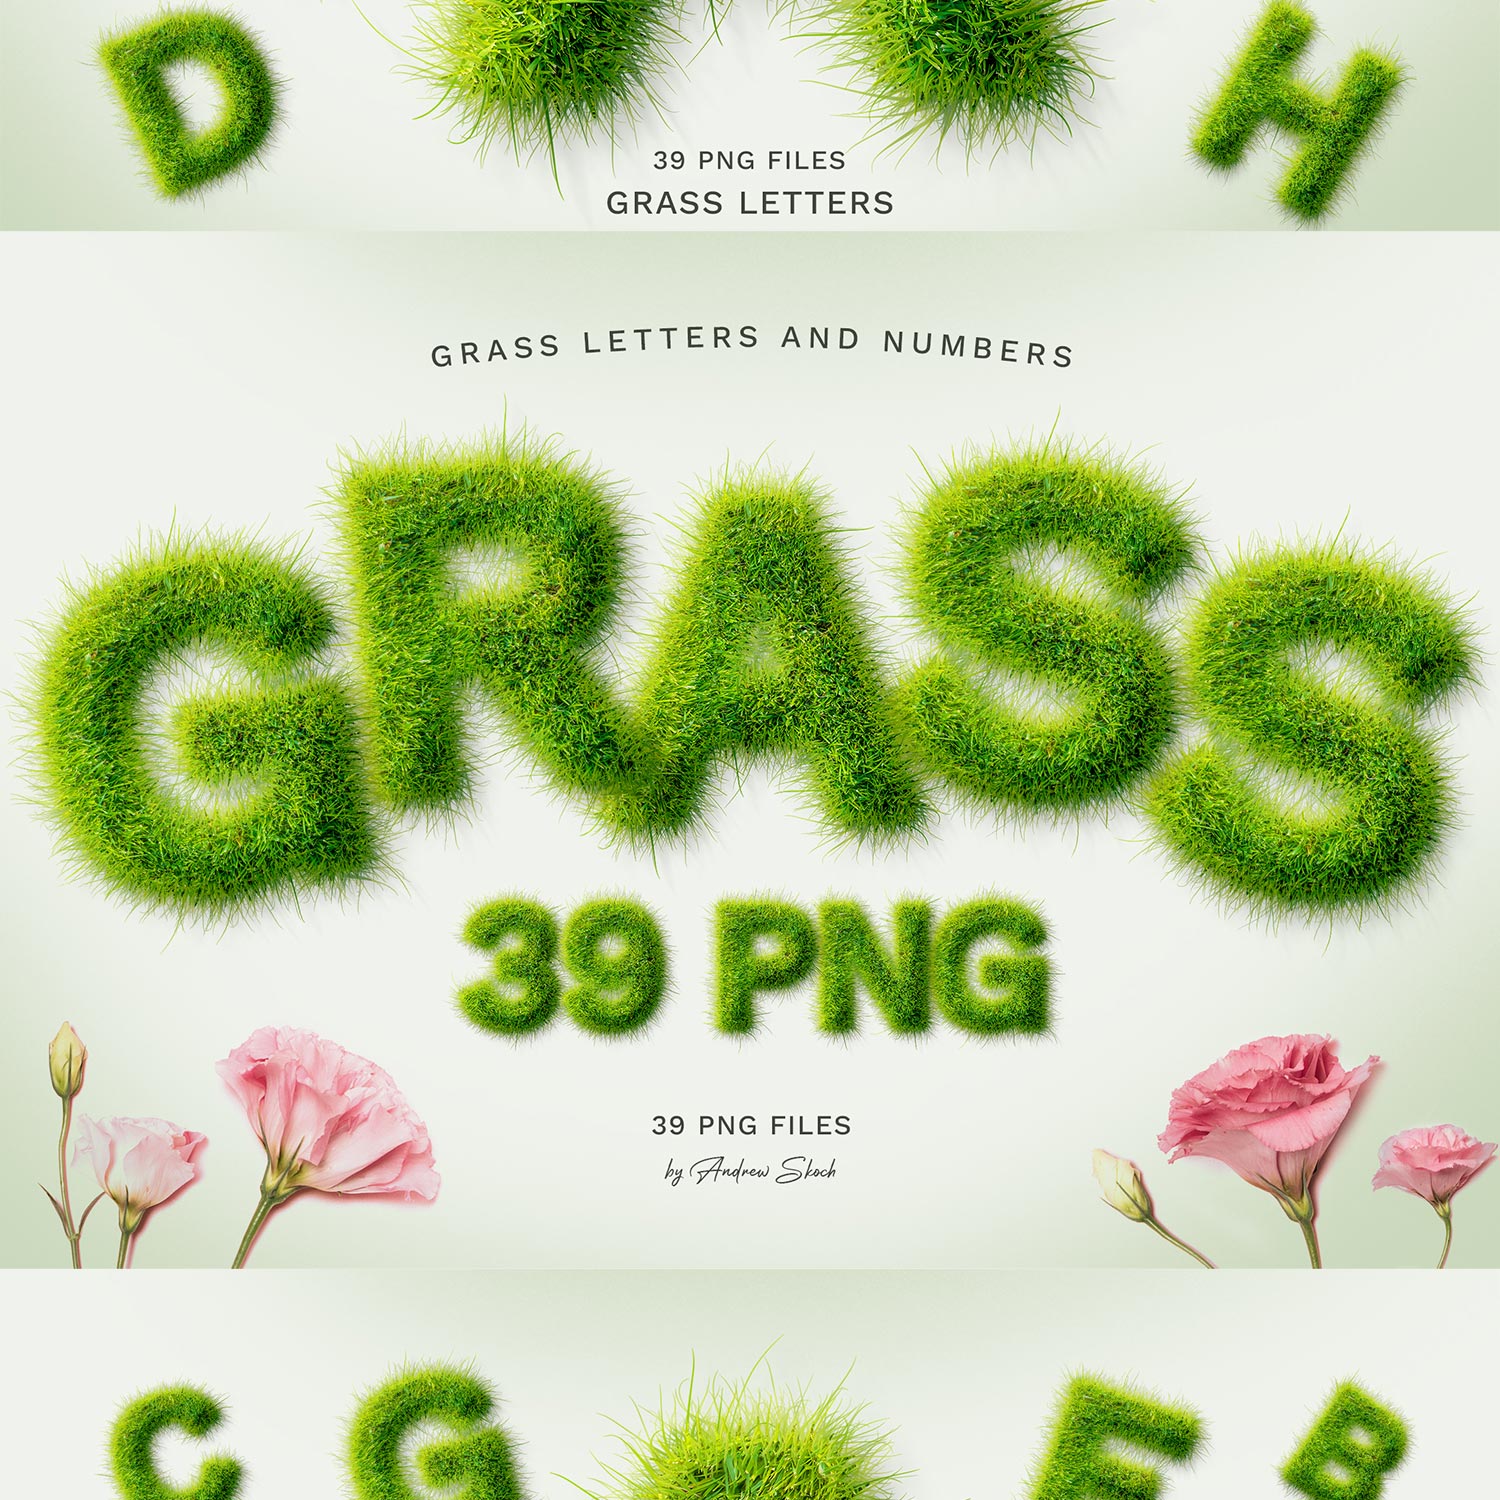 Grass Letters PNG Pack cover image.